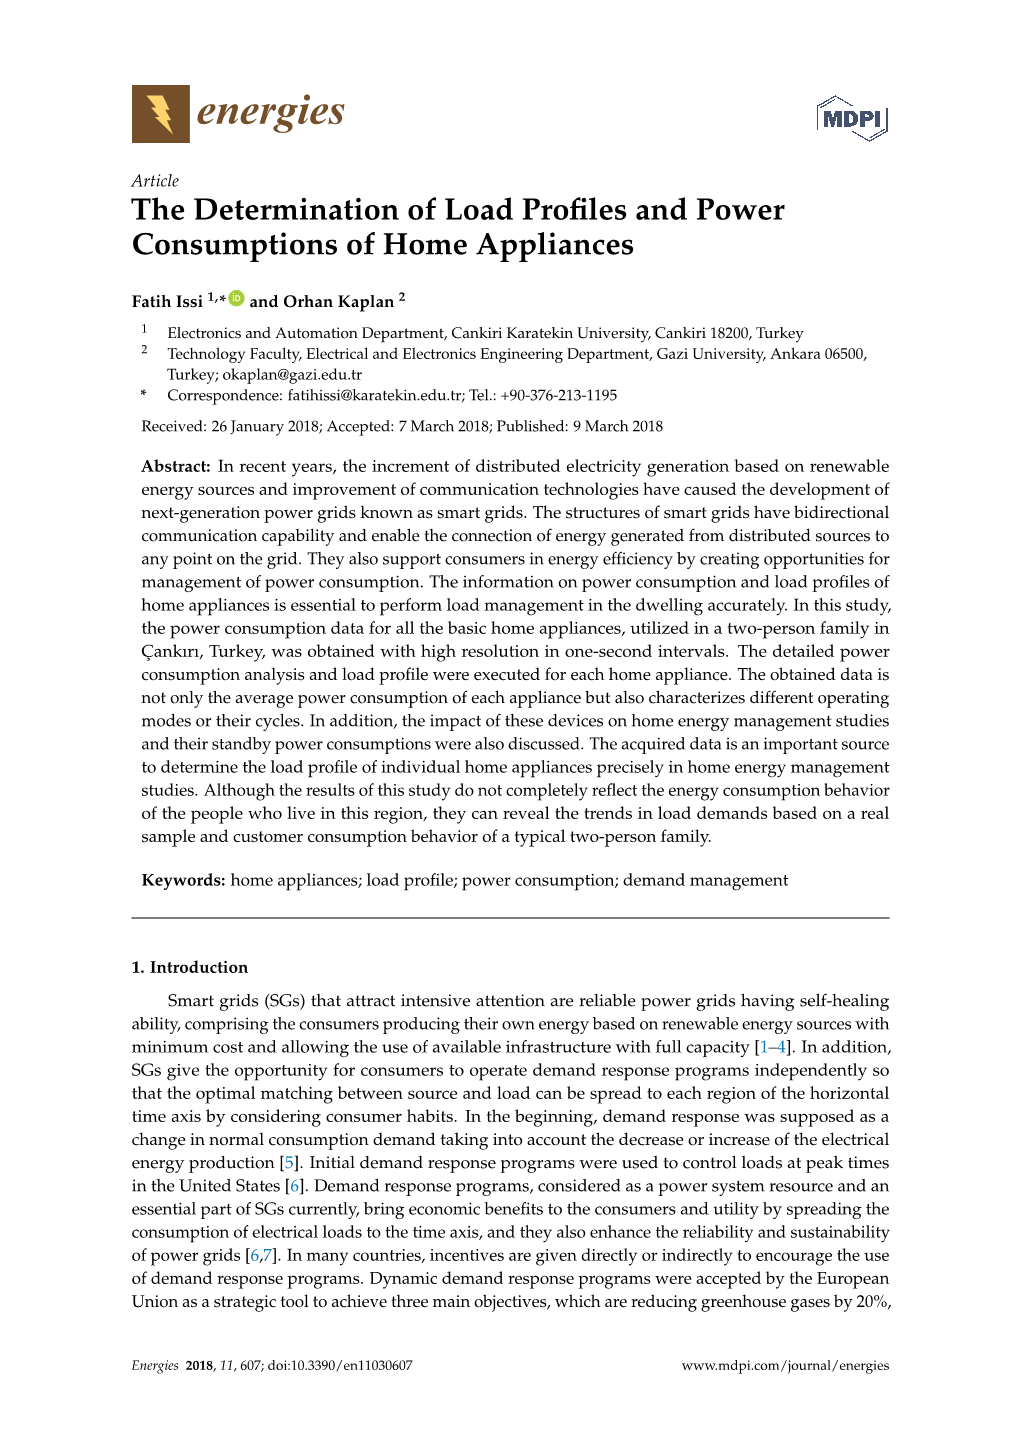 The Determination of Load Profiles and Power Consumptions of Home